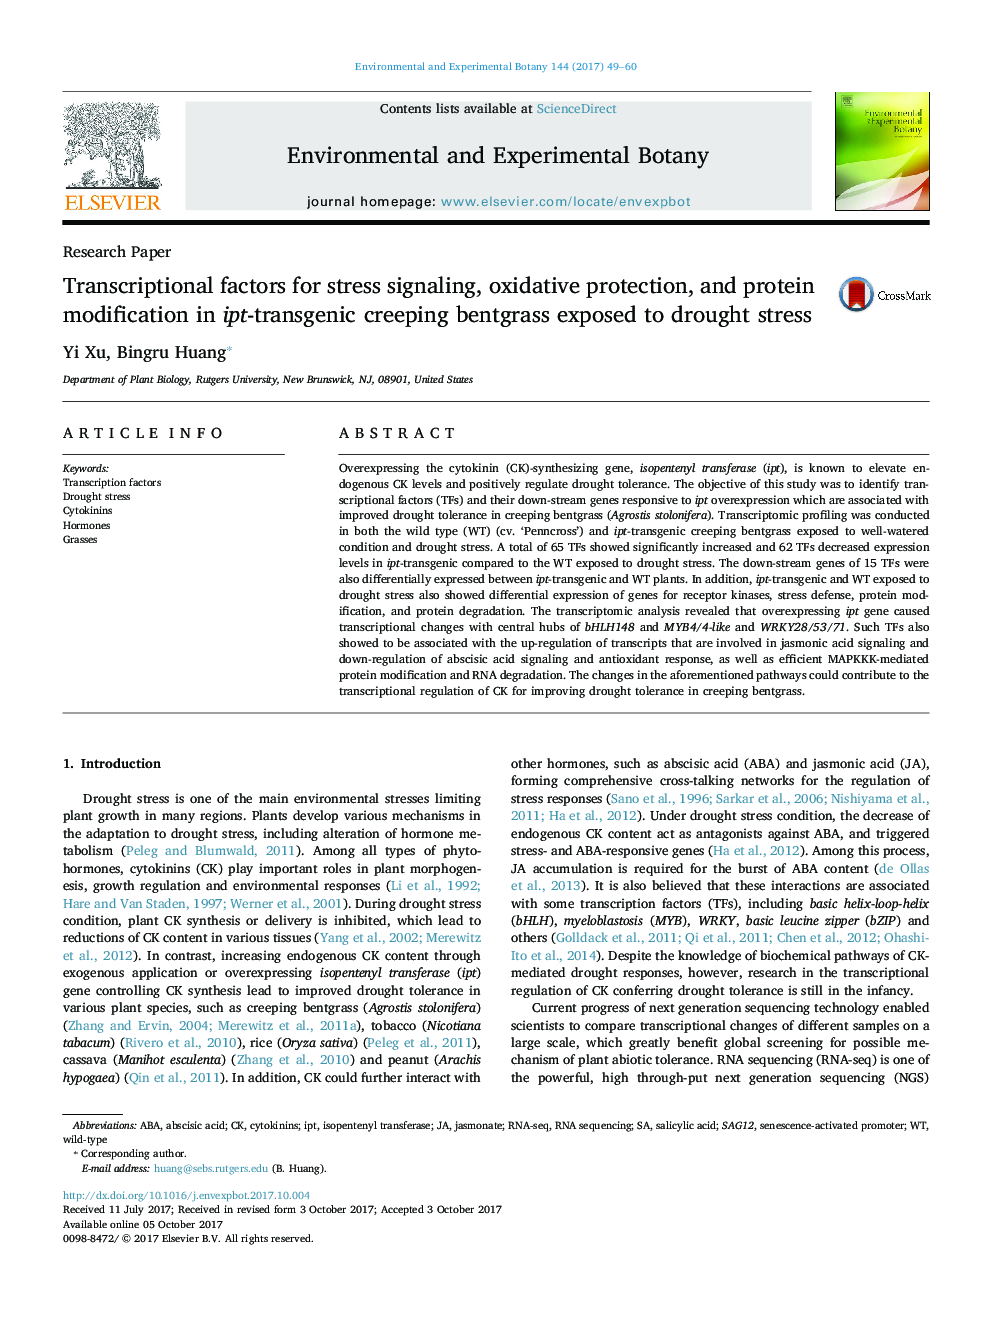 Research PaperTranscriptional factors for stress signaling, oxidative protection, and protein modification in ipt-transgenic creeping bentgrass exposed to drought stress